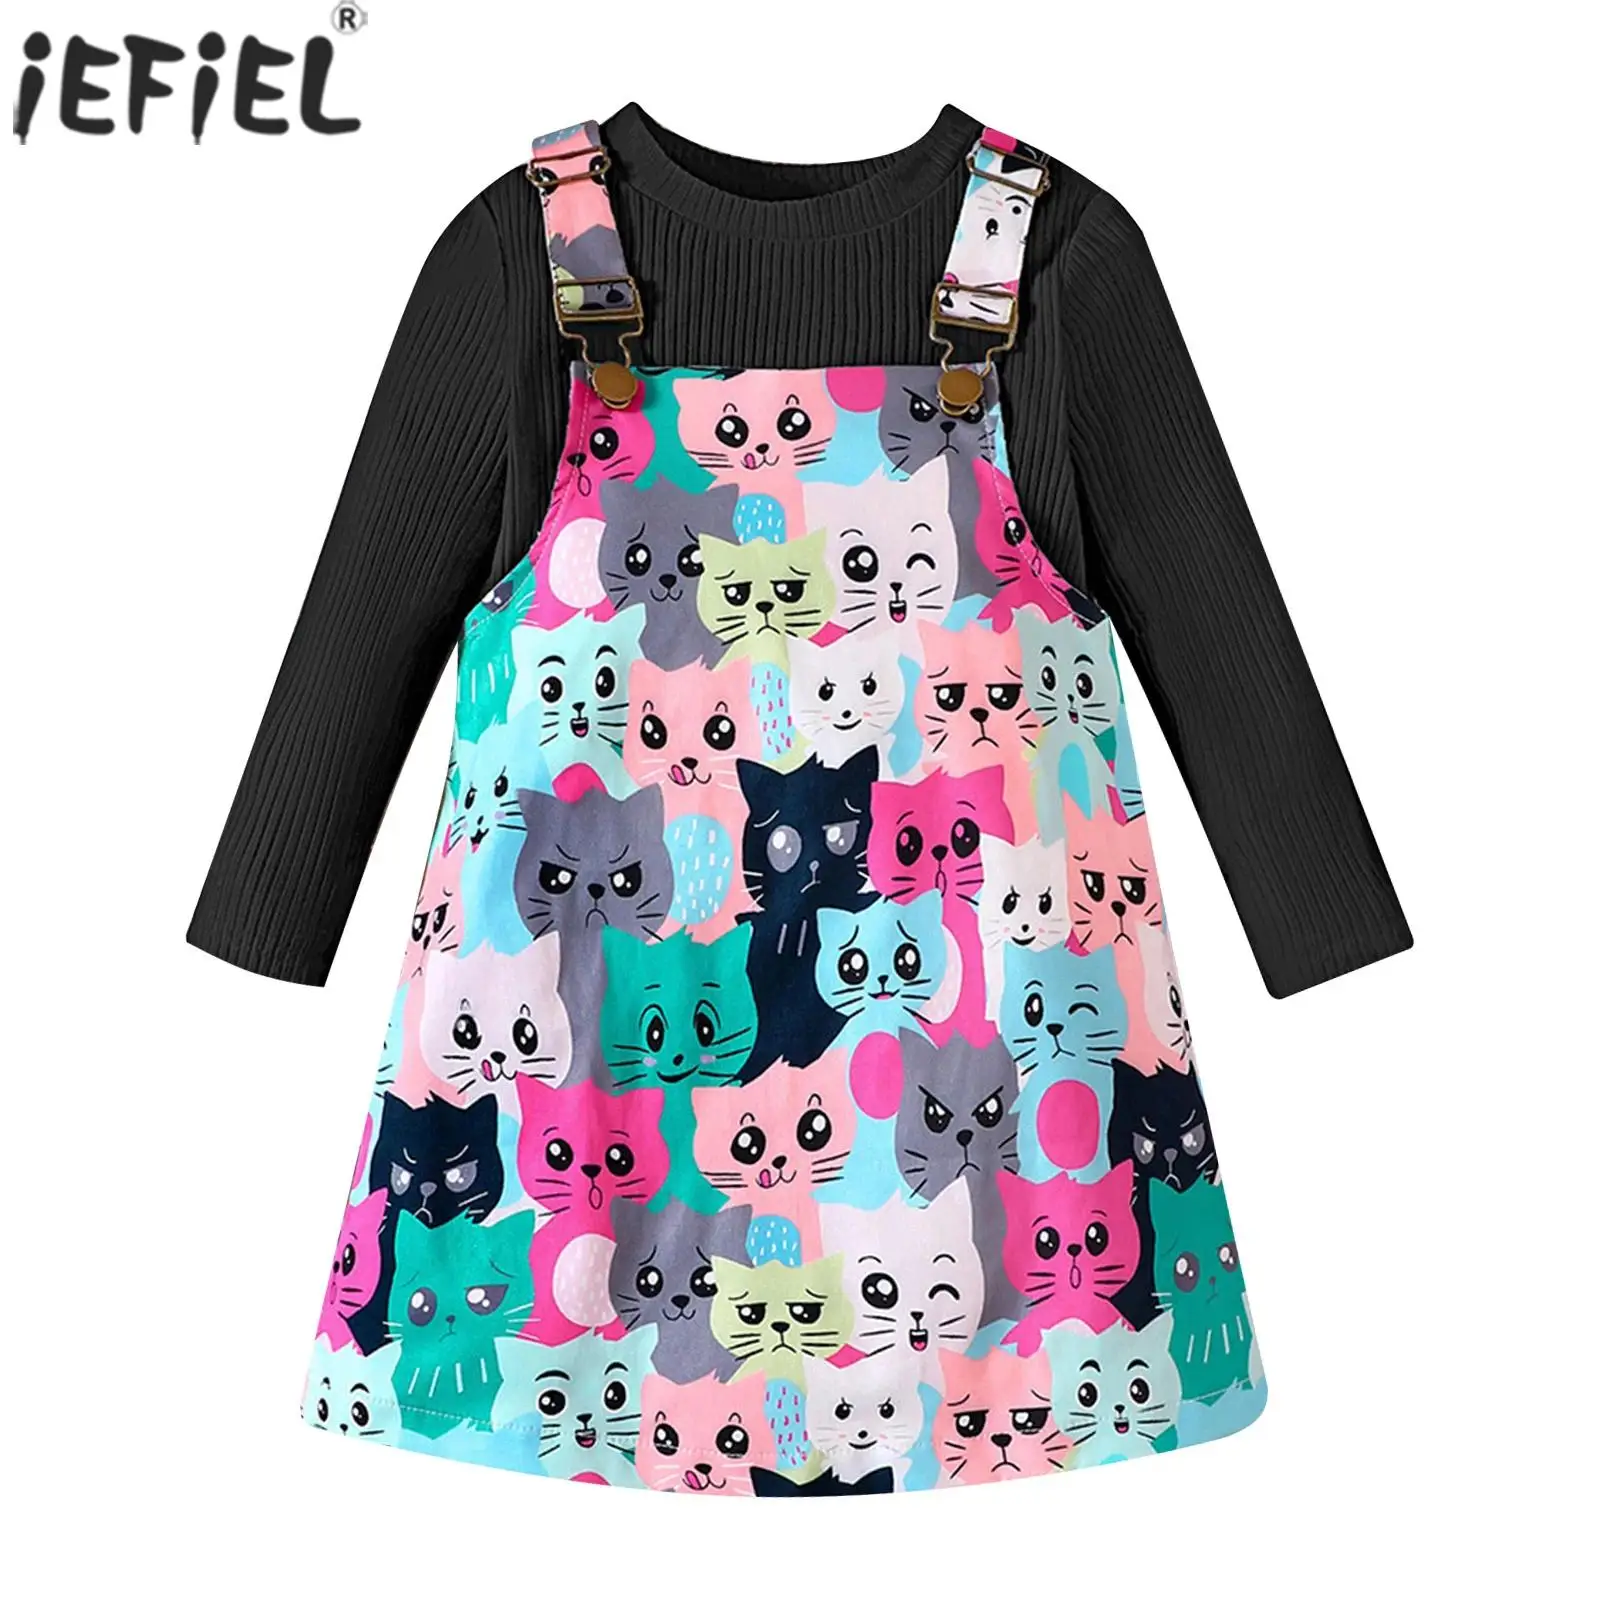 

Toddlers Kids Girls Suspender Dress Long Sleeve Ribbed Knitted Top with Cats Print Overall Skirts Casual Spring Autumn Outfits